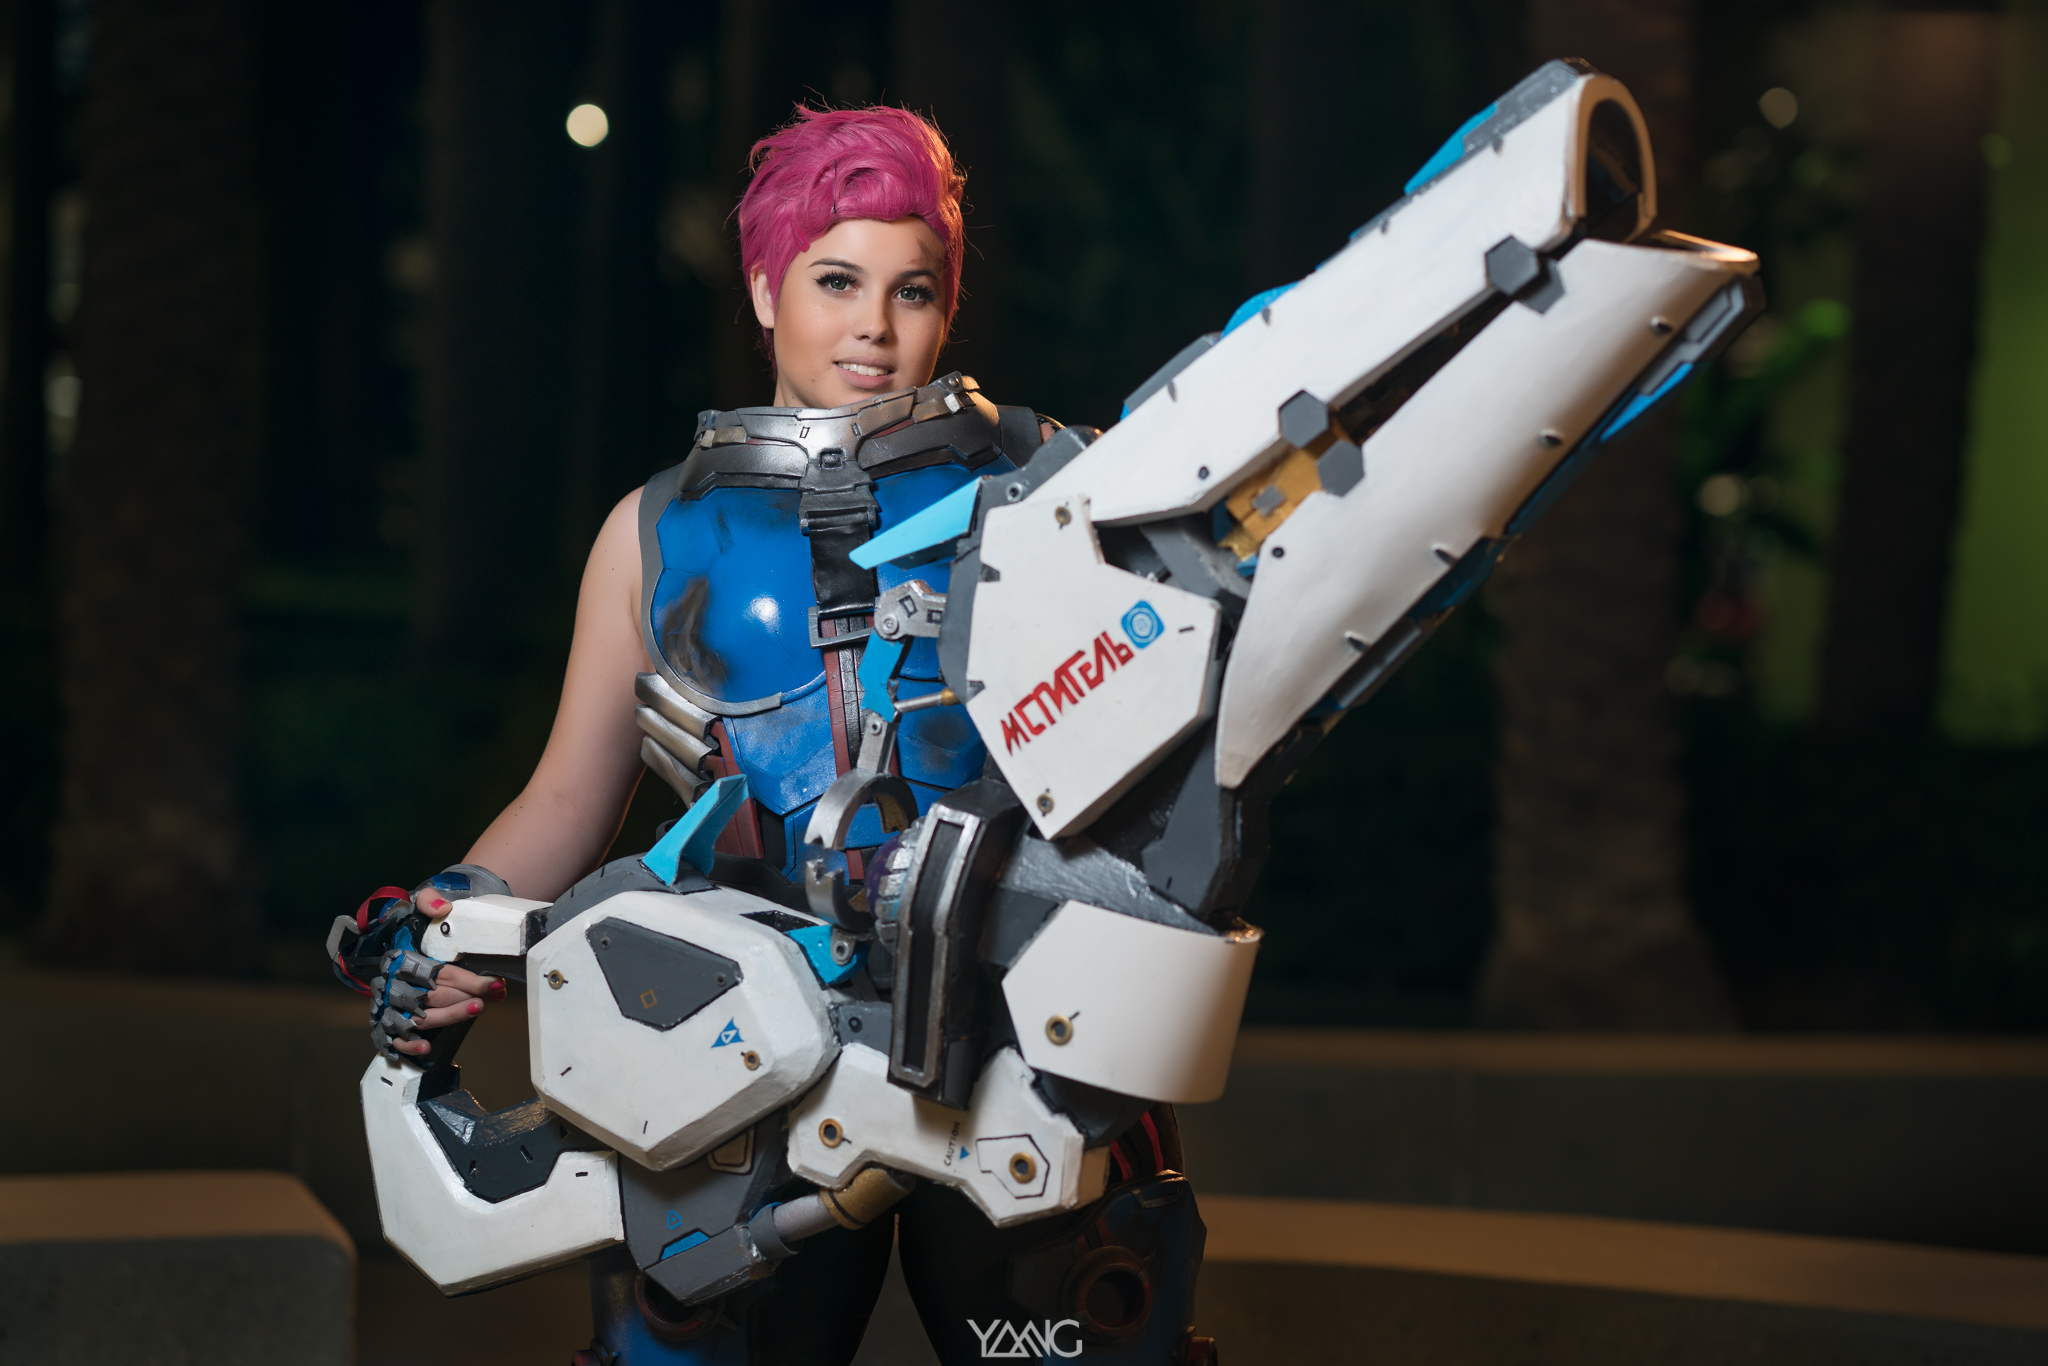 The Best Cosplay From BlizzCon 2017